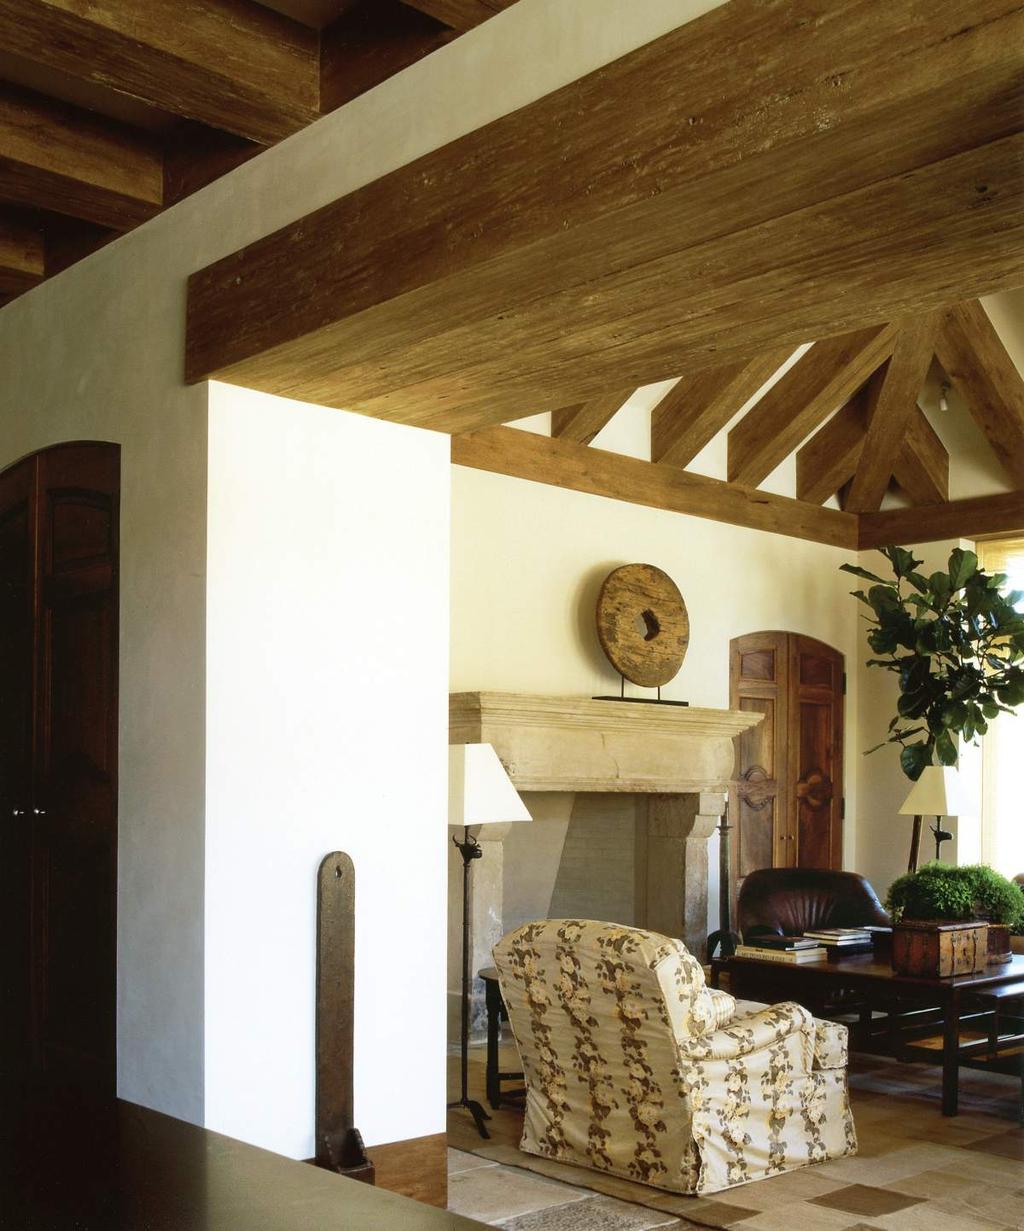 MICHEL ARNAUD A reclaimed hemlock beam between the kitchen and family room